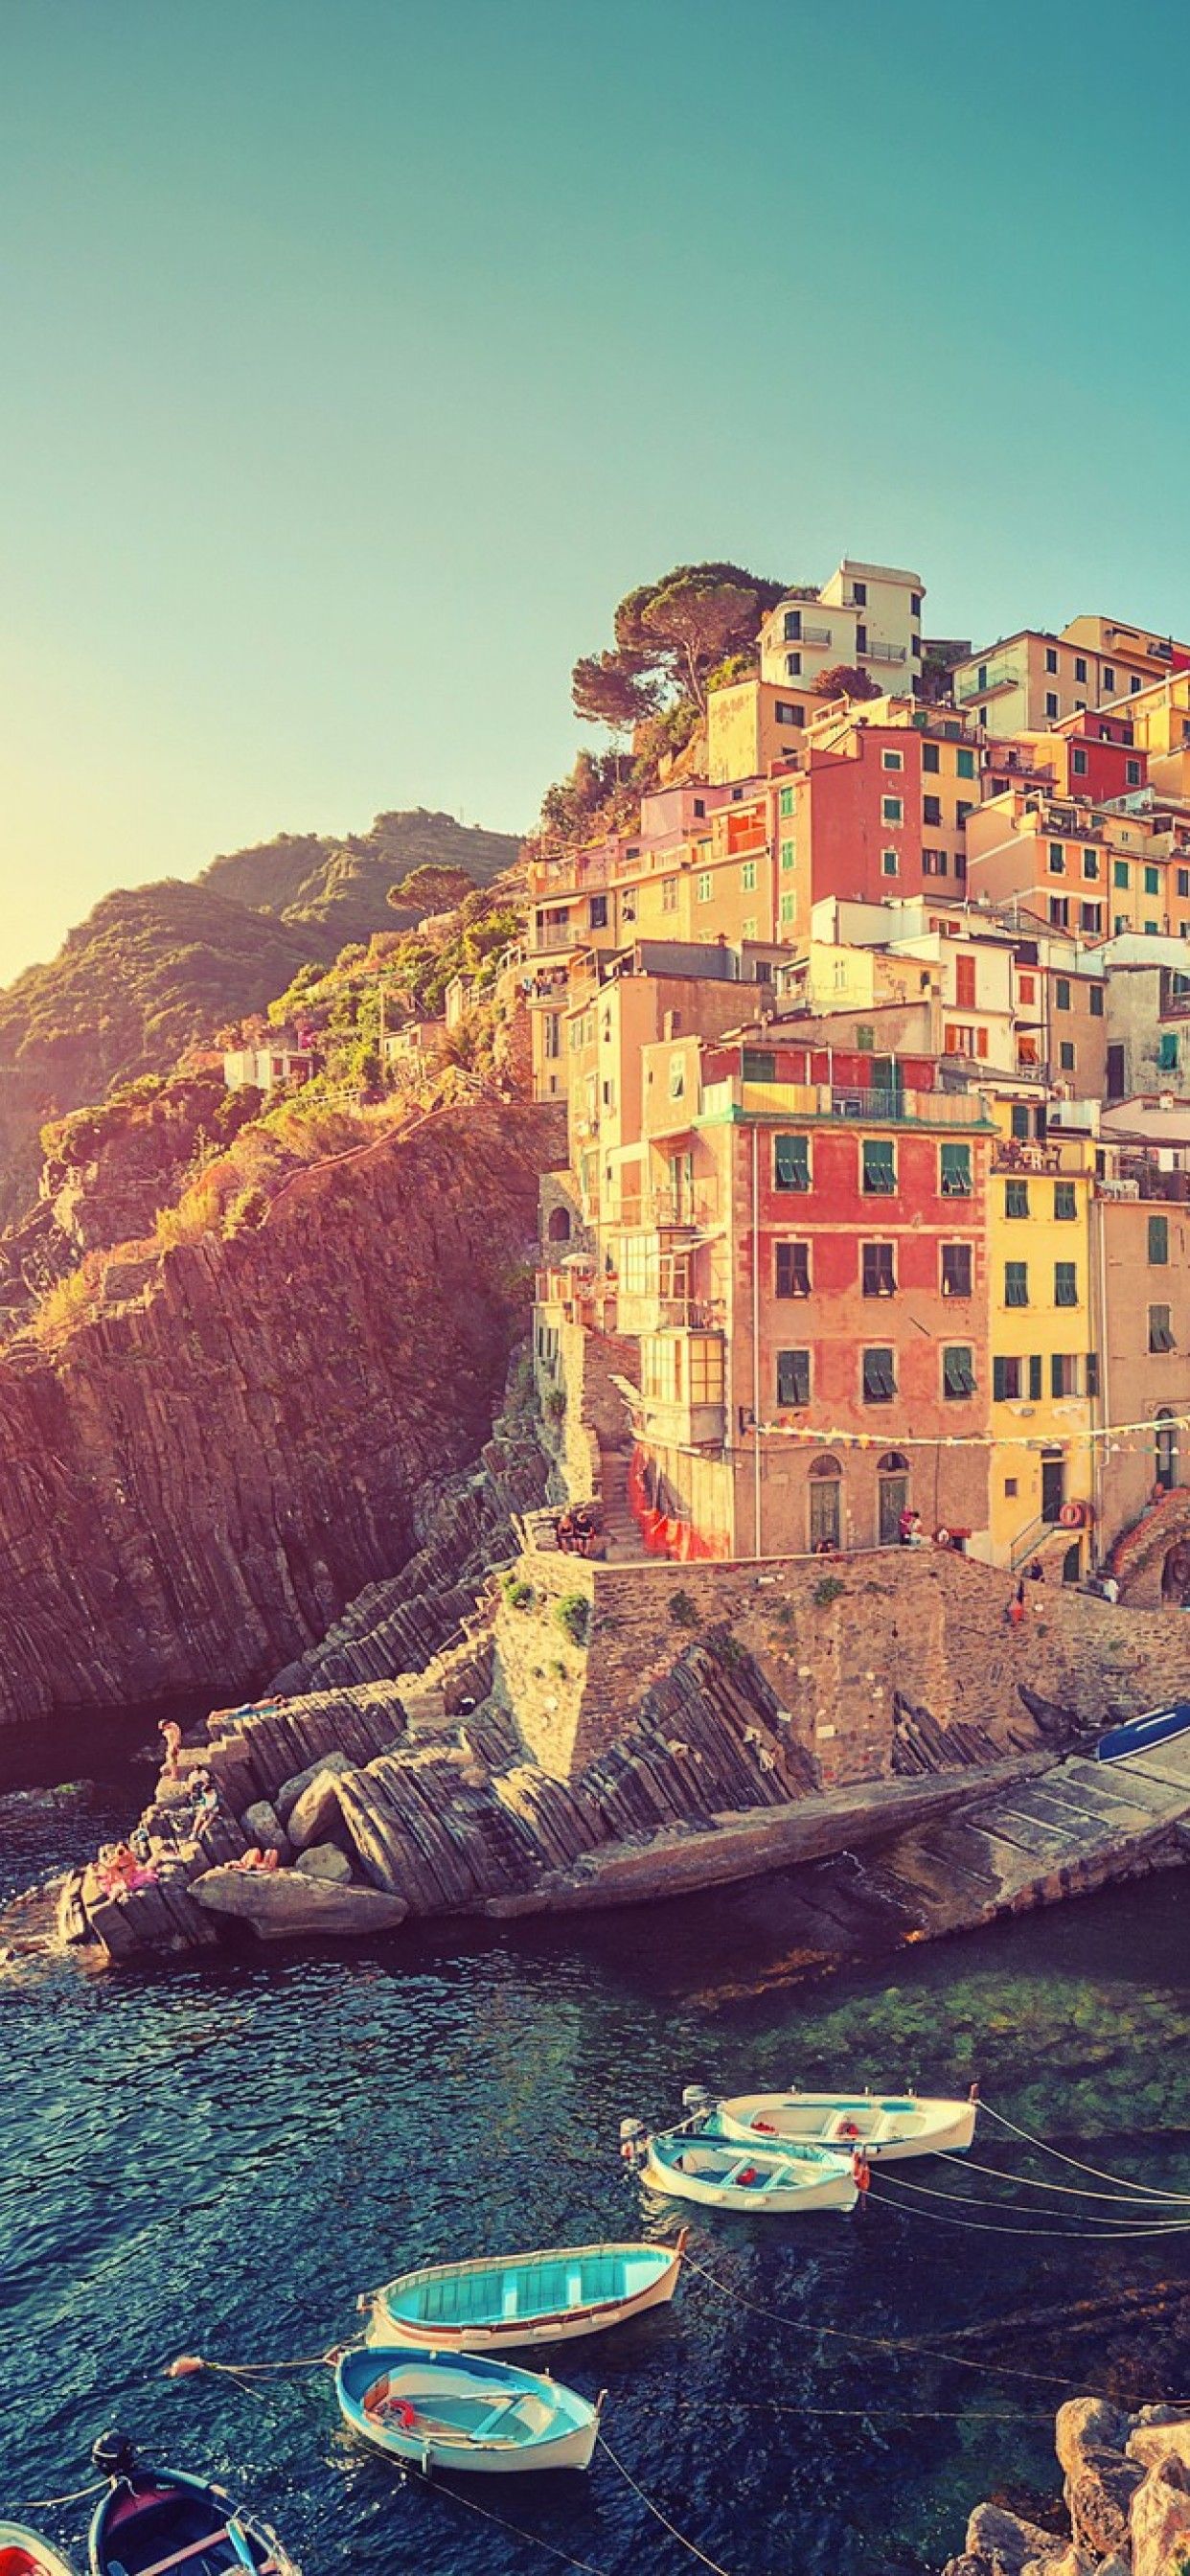 Italy iPhone XS Max Wallpaper Download